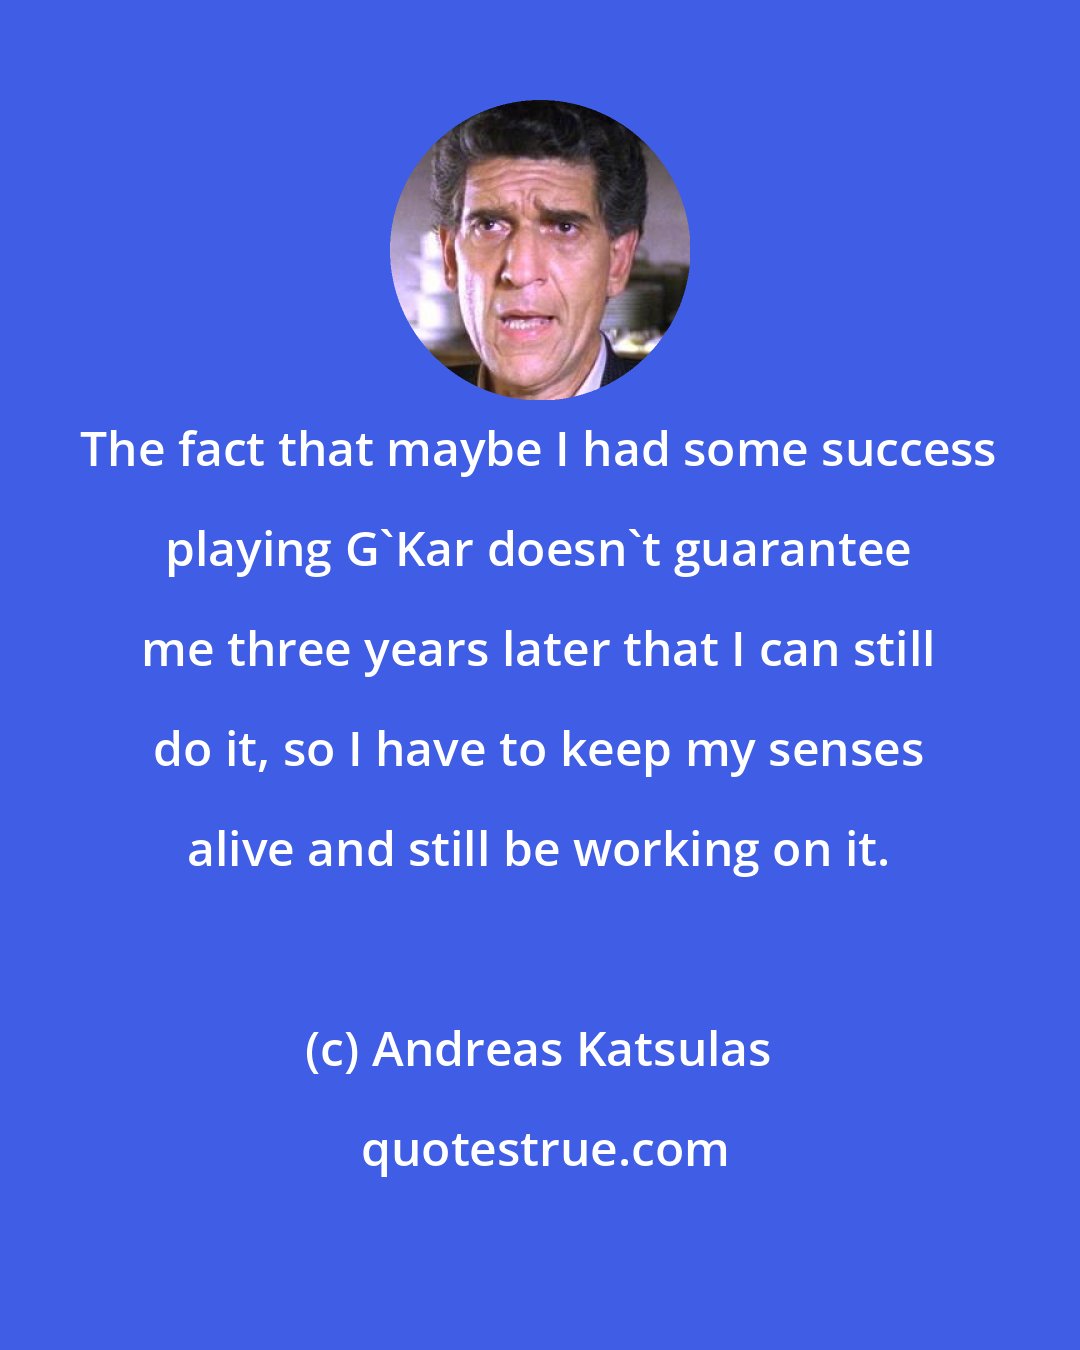 Andreas Katsulas: The fact that maybe I had some success playing G'Kar doesn't guarantee me three years later that I can still do it, so I have to keep my senses alive and still be working on it.